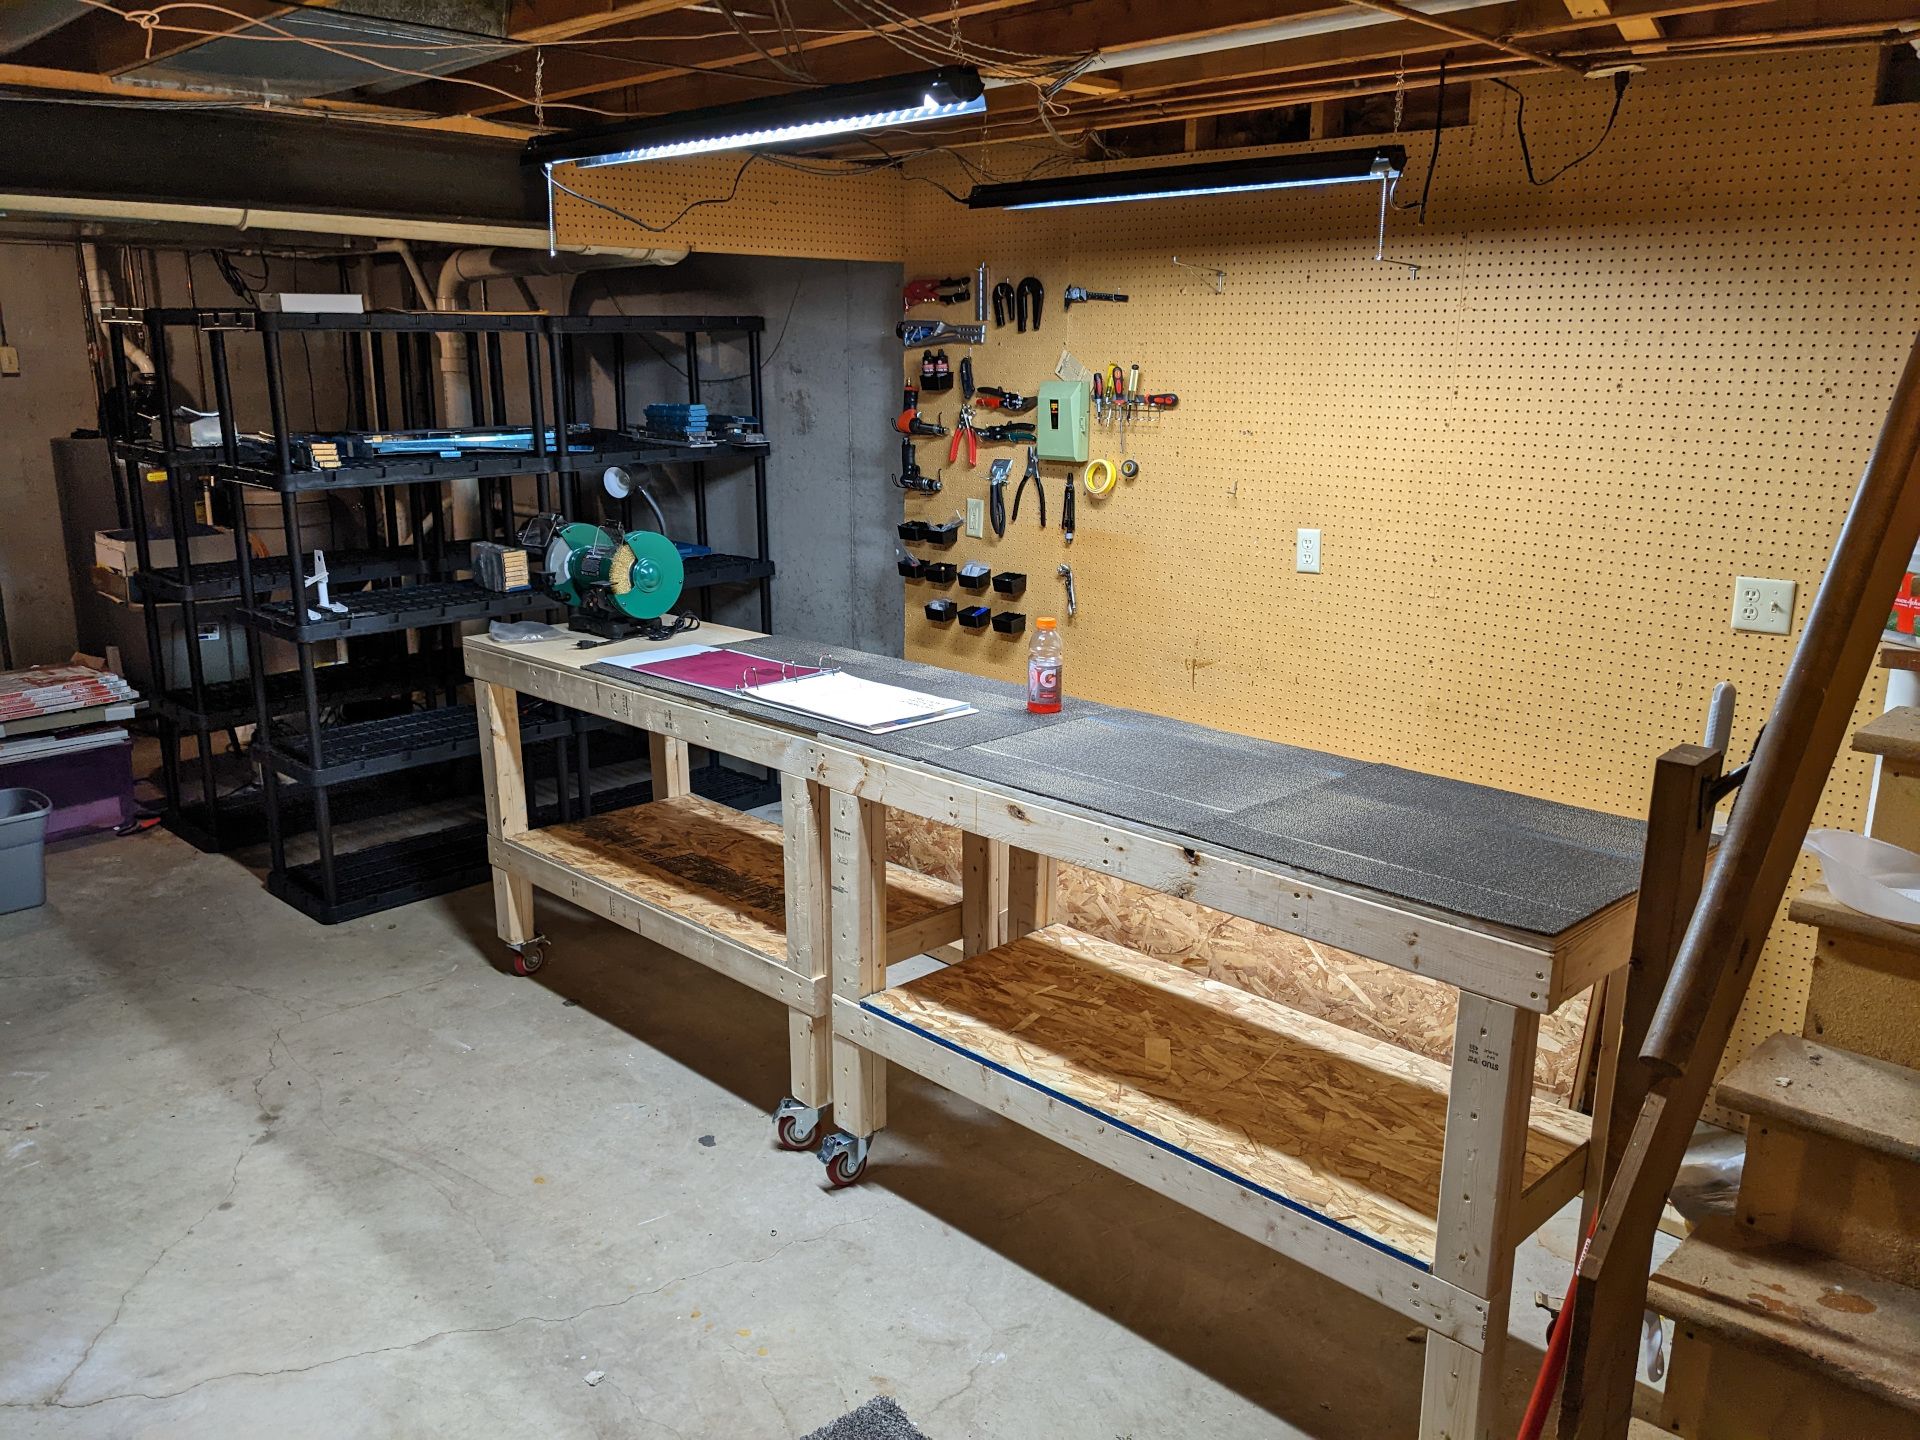 Final picture of the woork area. Pegboard filled, shelves places, work benches clean with carpet on top.